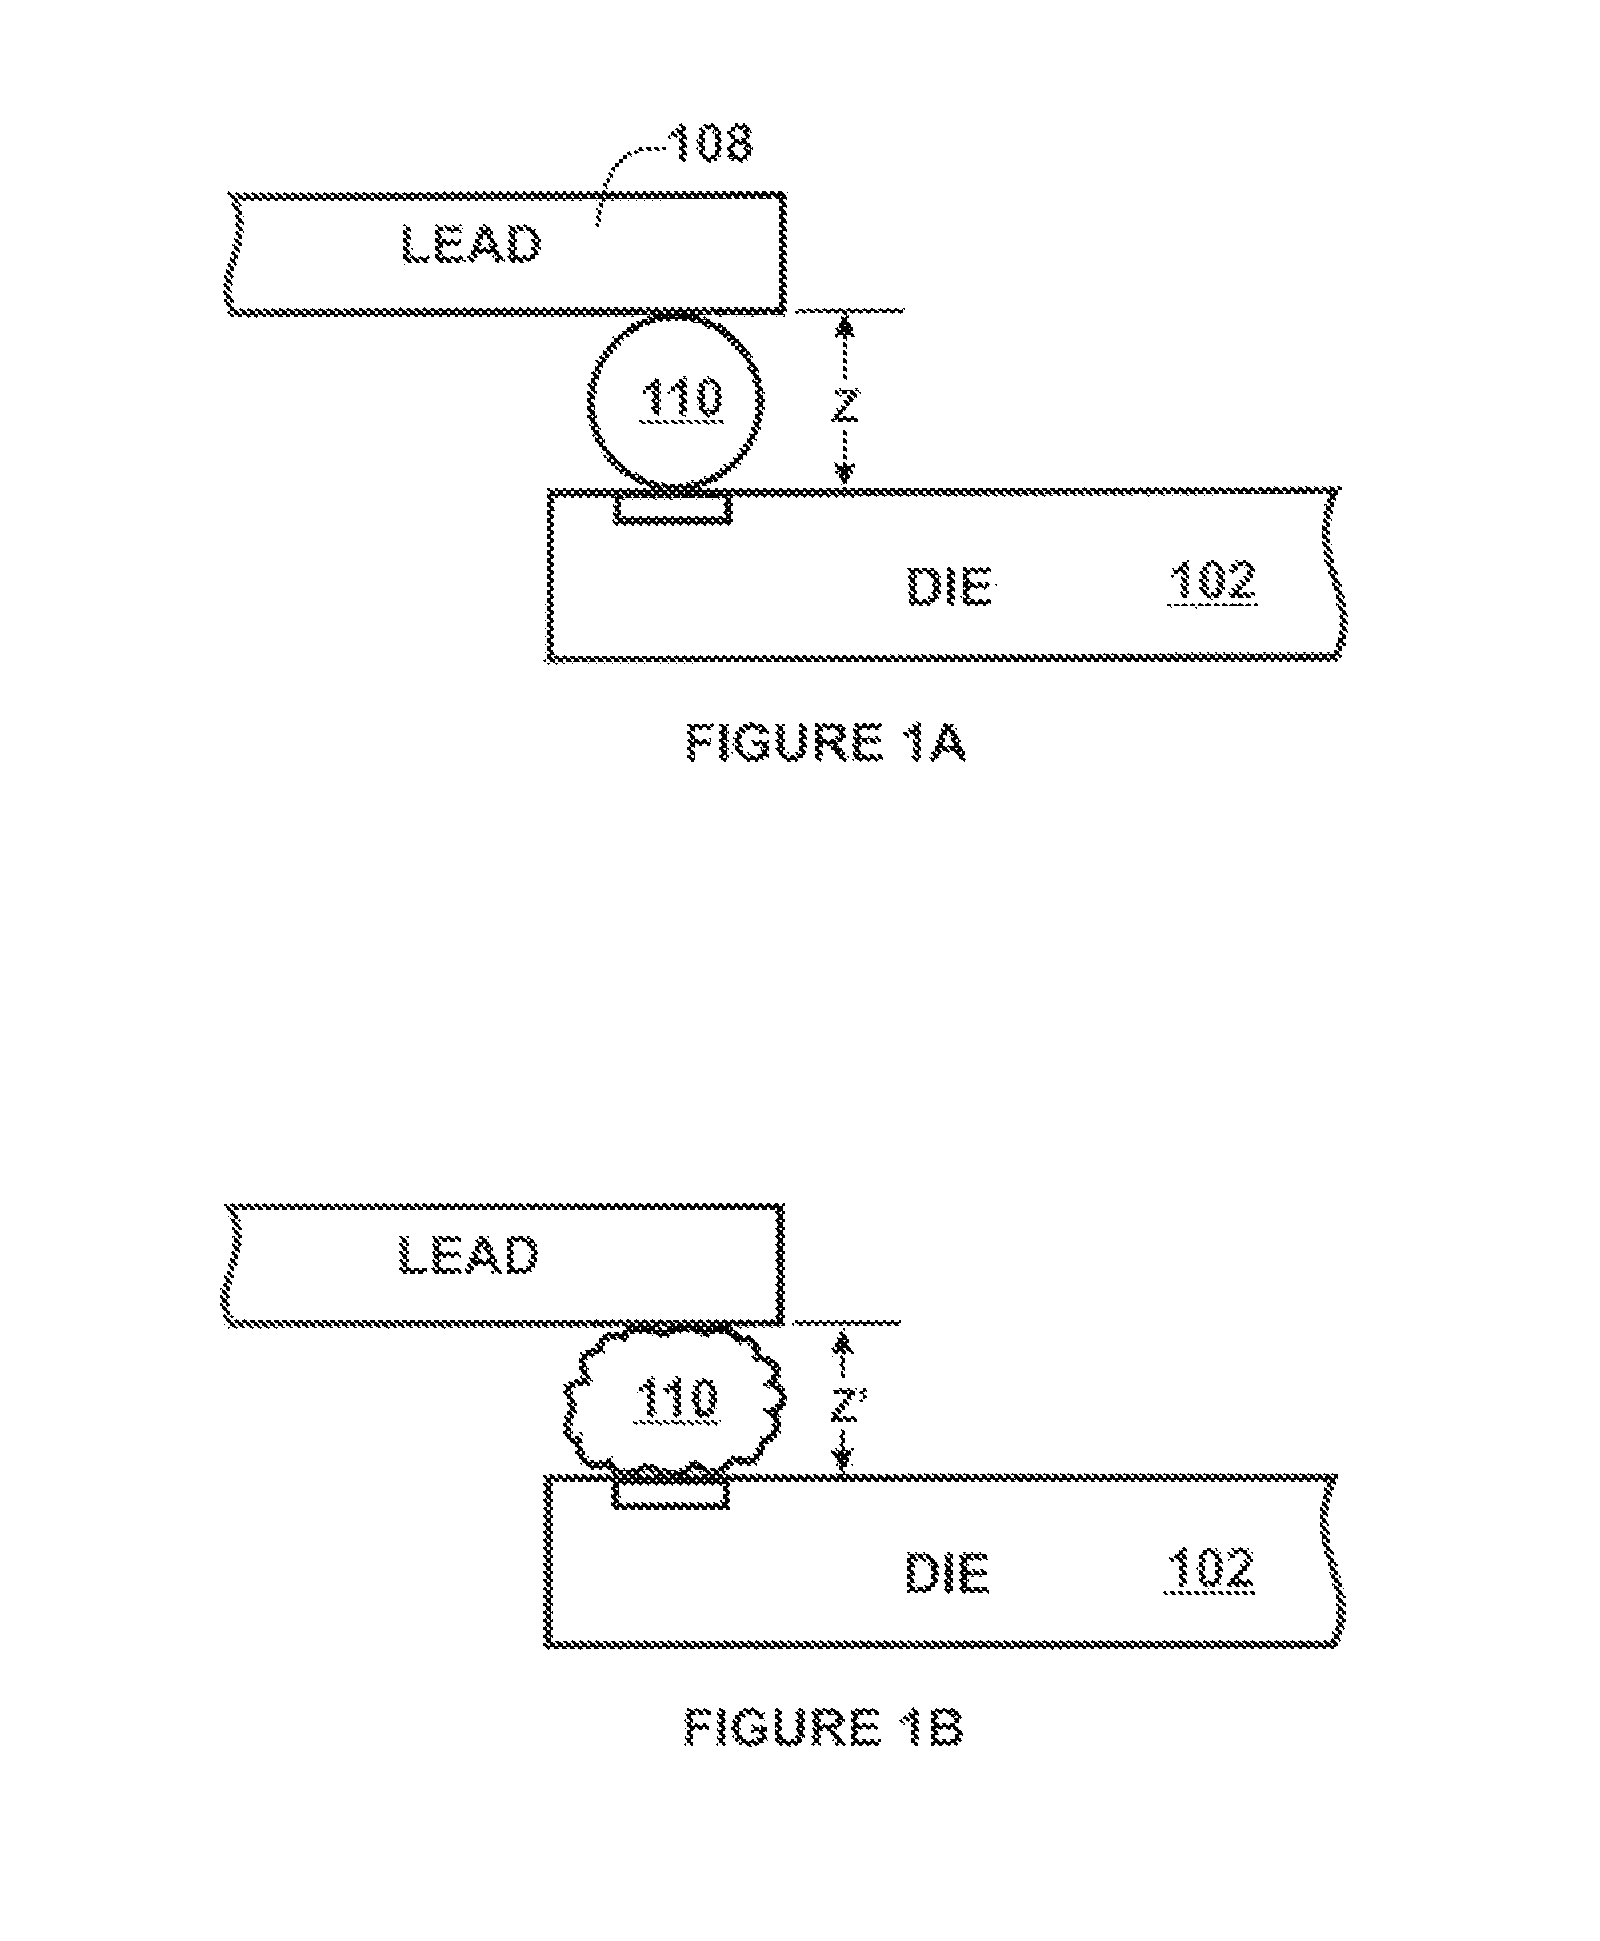 Interconnection of lead frame to die utilizing flip chip process